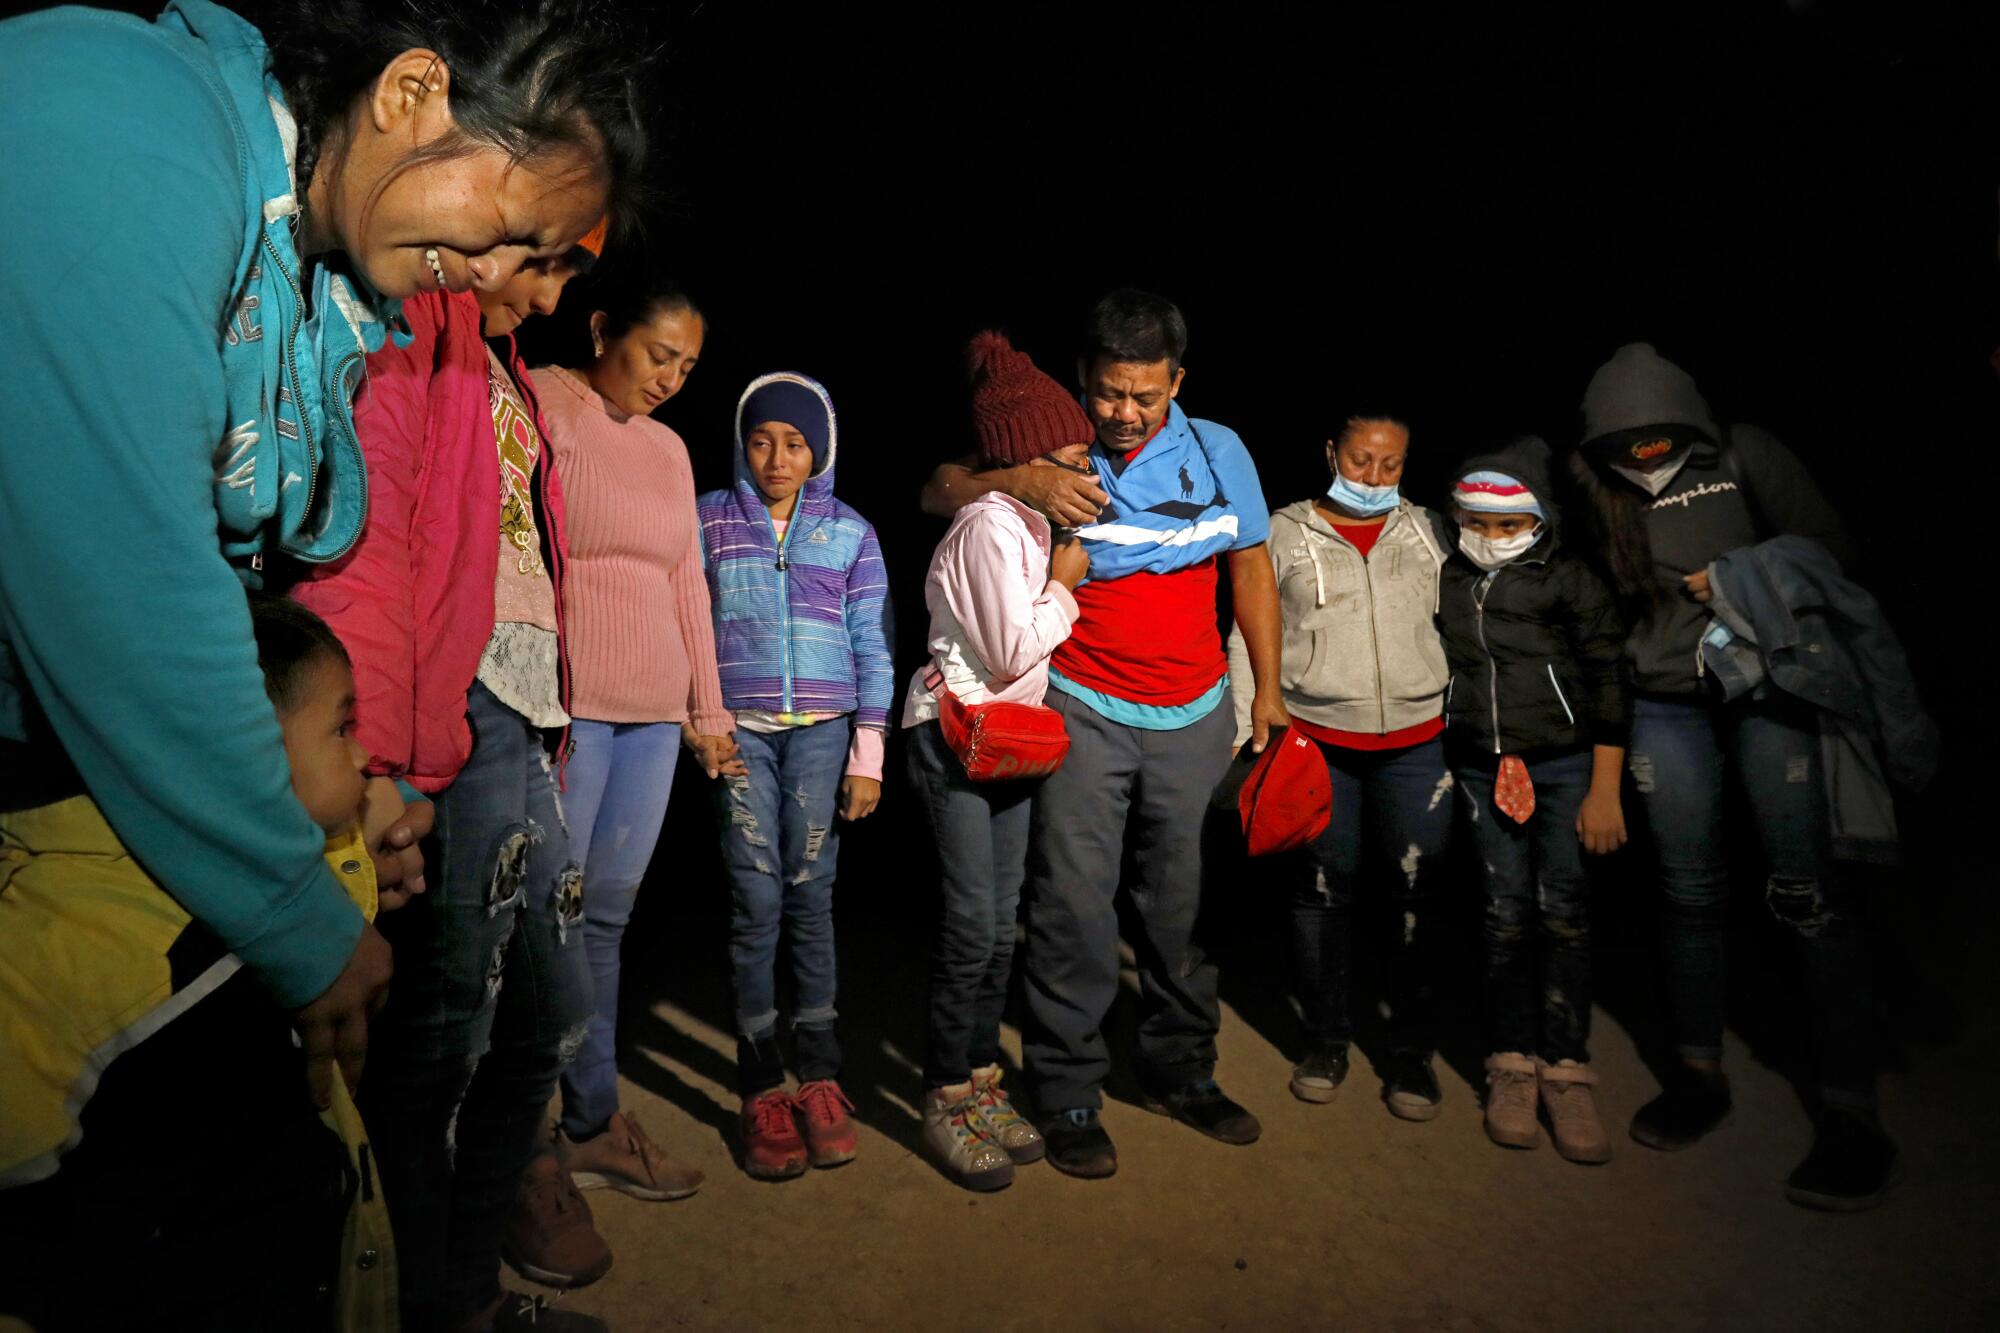 A group of migrants, some crying, stand together at night